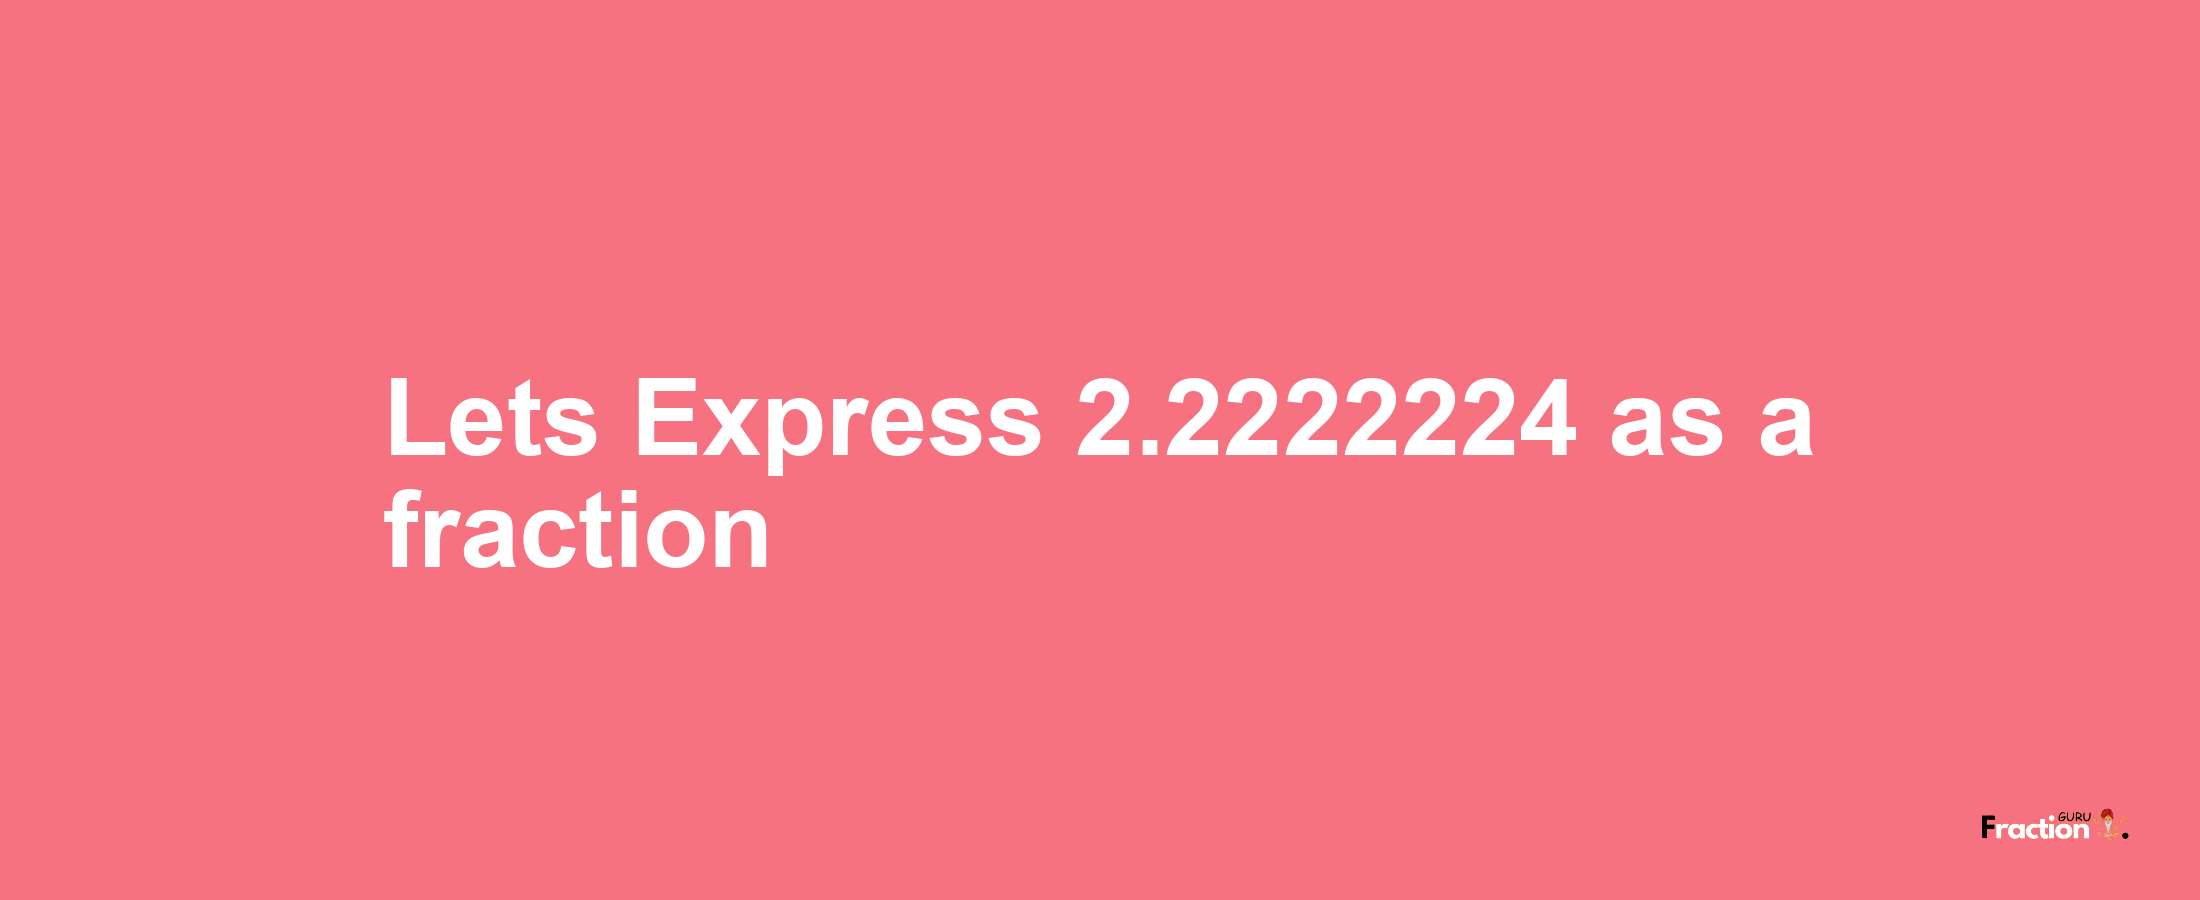 Lets Express 2.2222224 as afraction